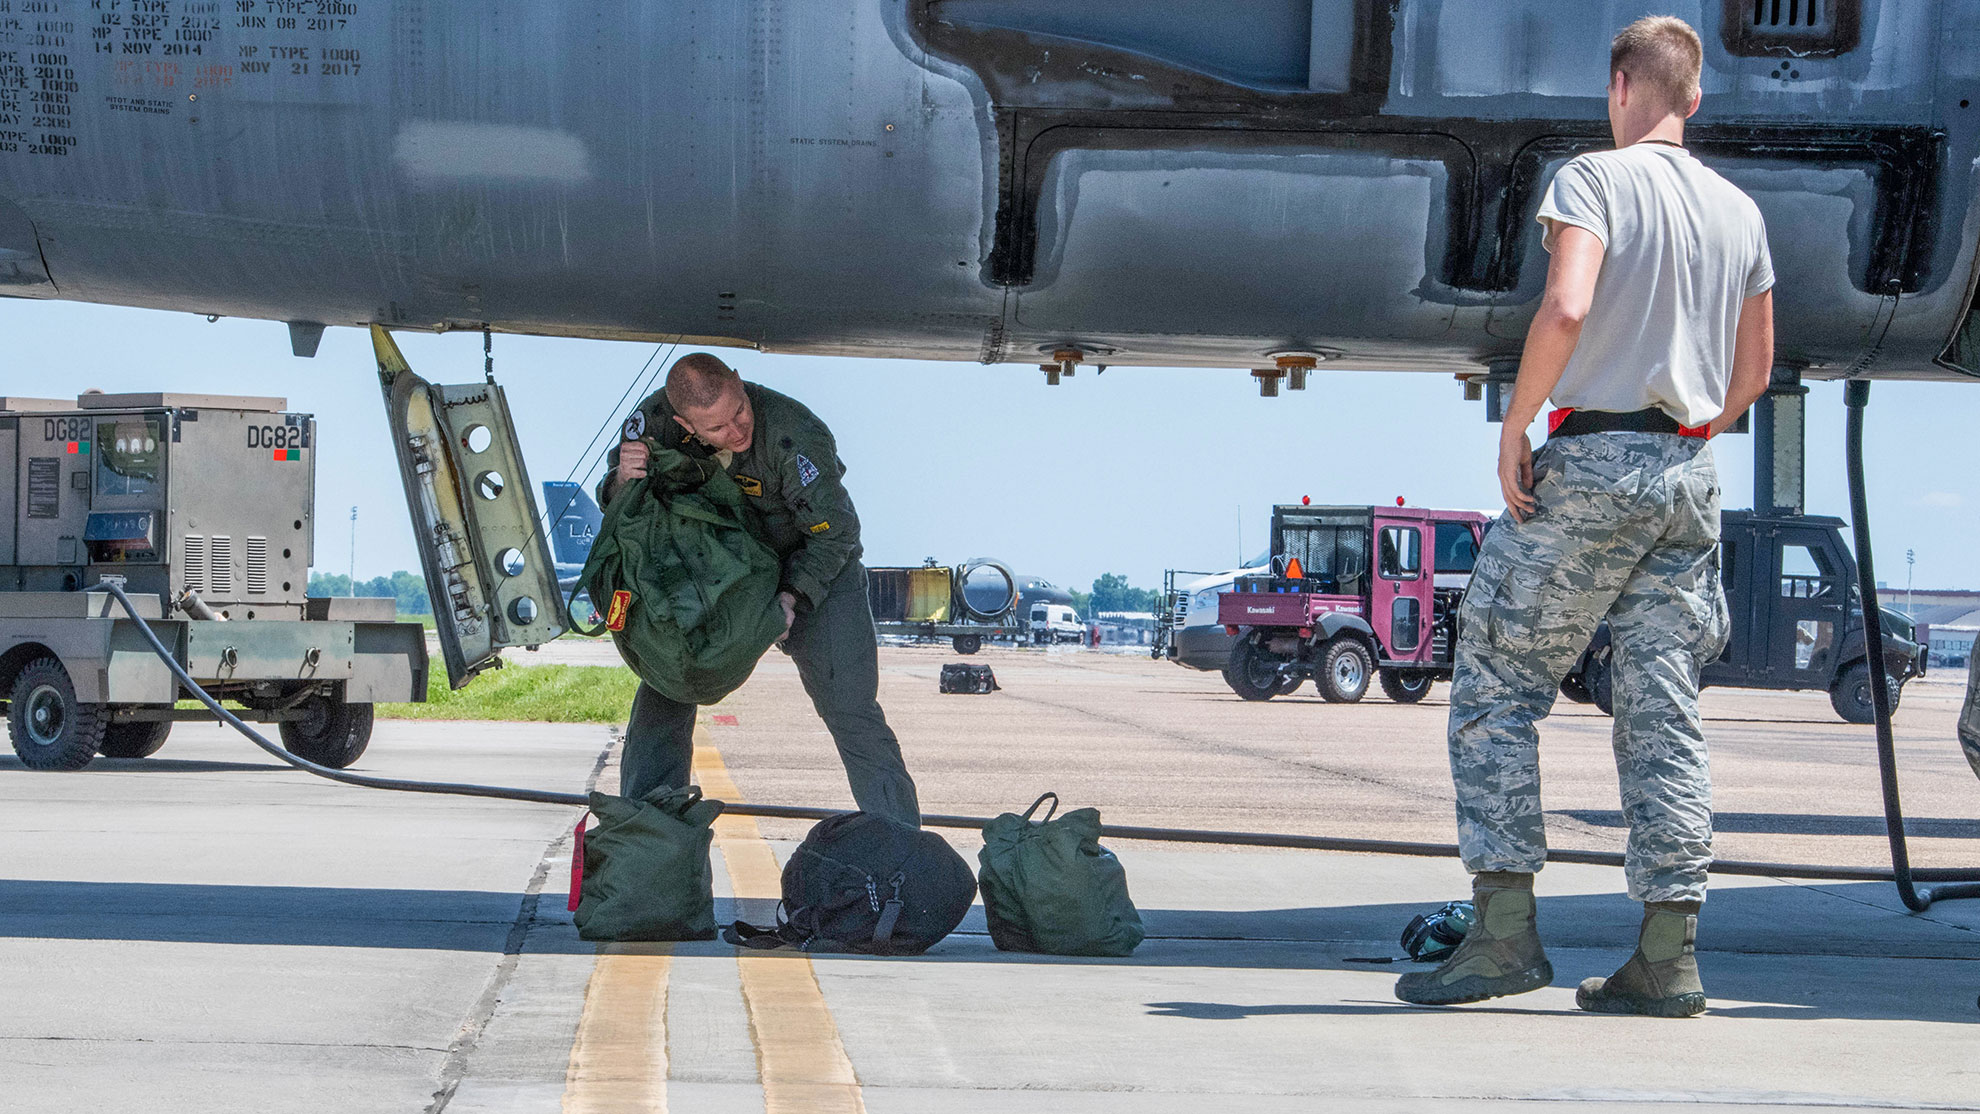 Lt.Col. Eric Barkley, an 11th Bomb Squadron weapons system officer, unloads, “Wise Guy,” a B-52 Stratofortress after flying into Barksdale Air Force Base, La., May 15, 2019. The B-52 flew into Barksdale AFB from Davis-Monthan AFB, Ariz., to receive upgrades and modifications to turn it into a mission capable aircraft -- U.S. Air Force photo by Airman Jacob Wrightsman. -